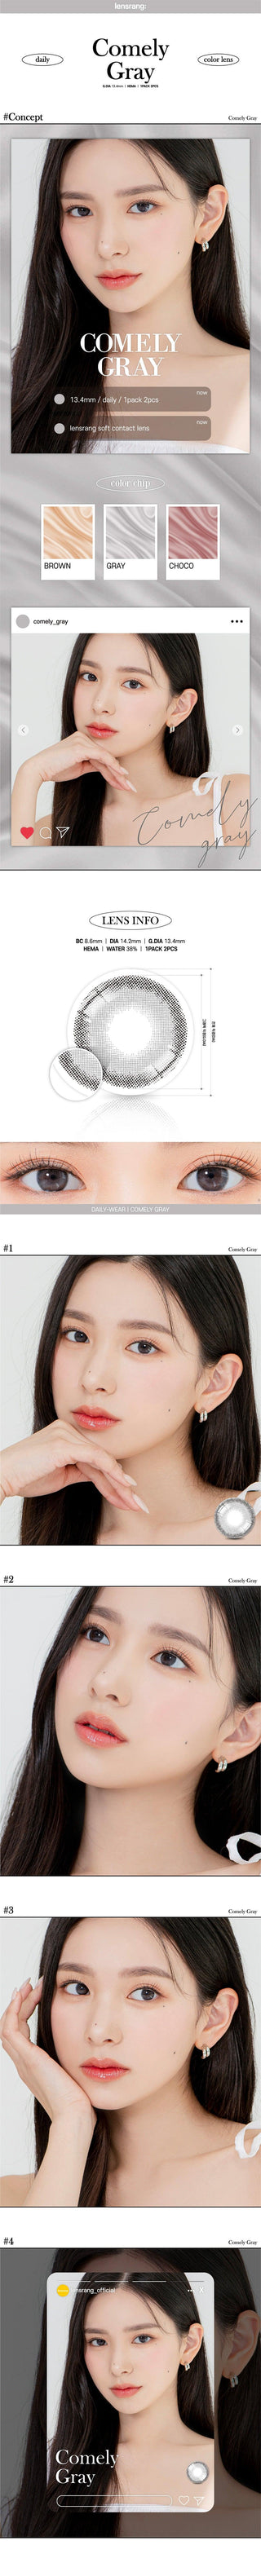 Model demonstrating a Kpop-inspired look with Lensrang Comely Grey coloured contact lenses, demonstrating the brightening and enlarging effect of the circle contact lenses on her dark eyes.